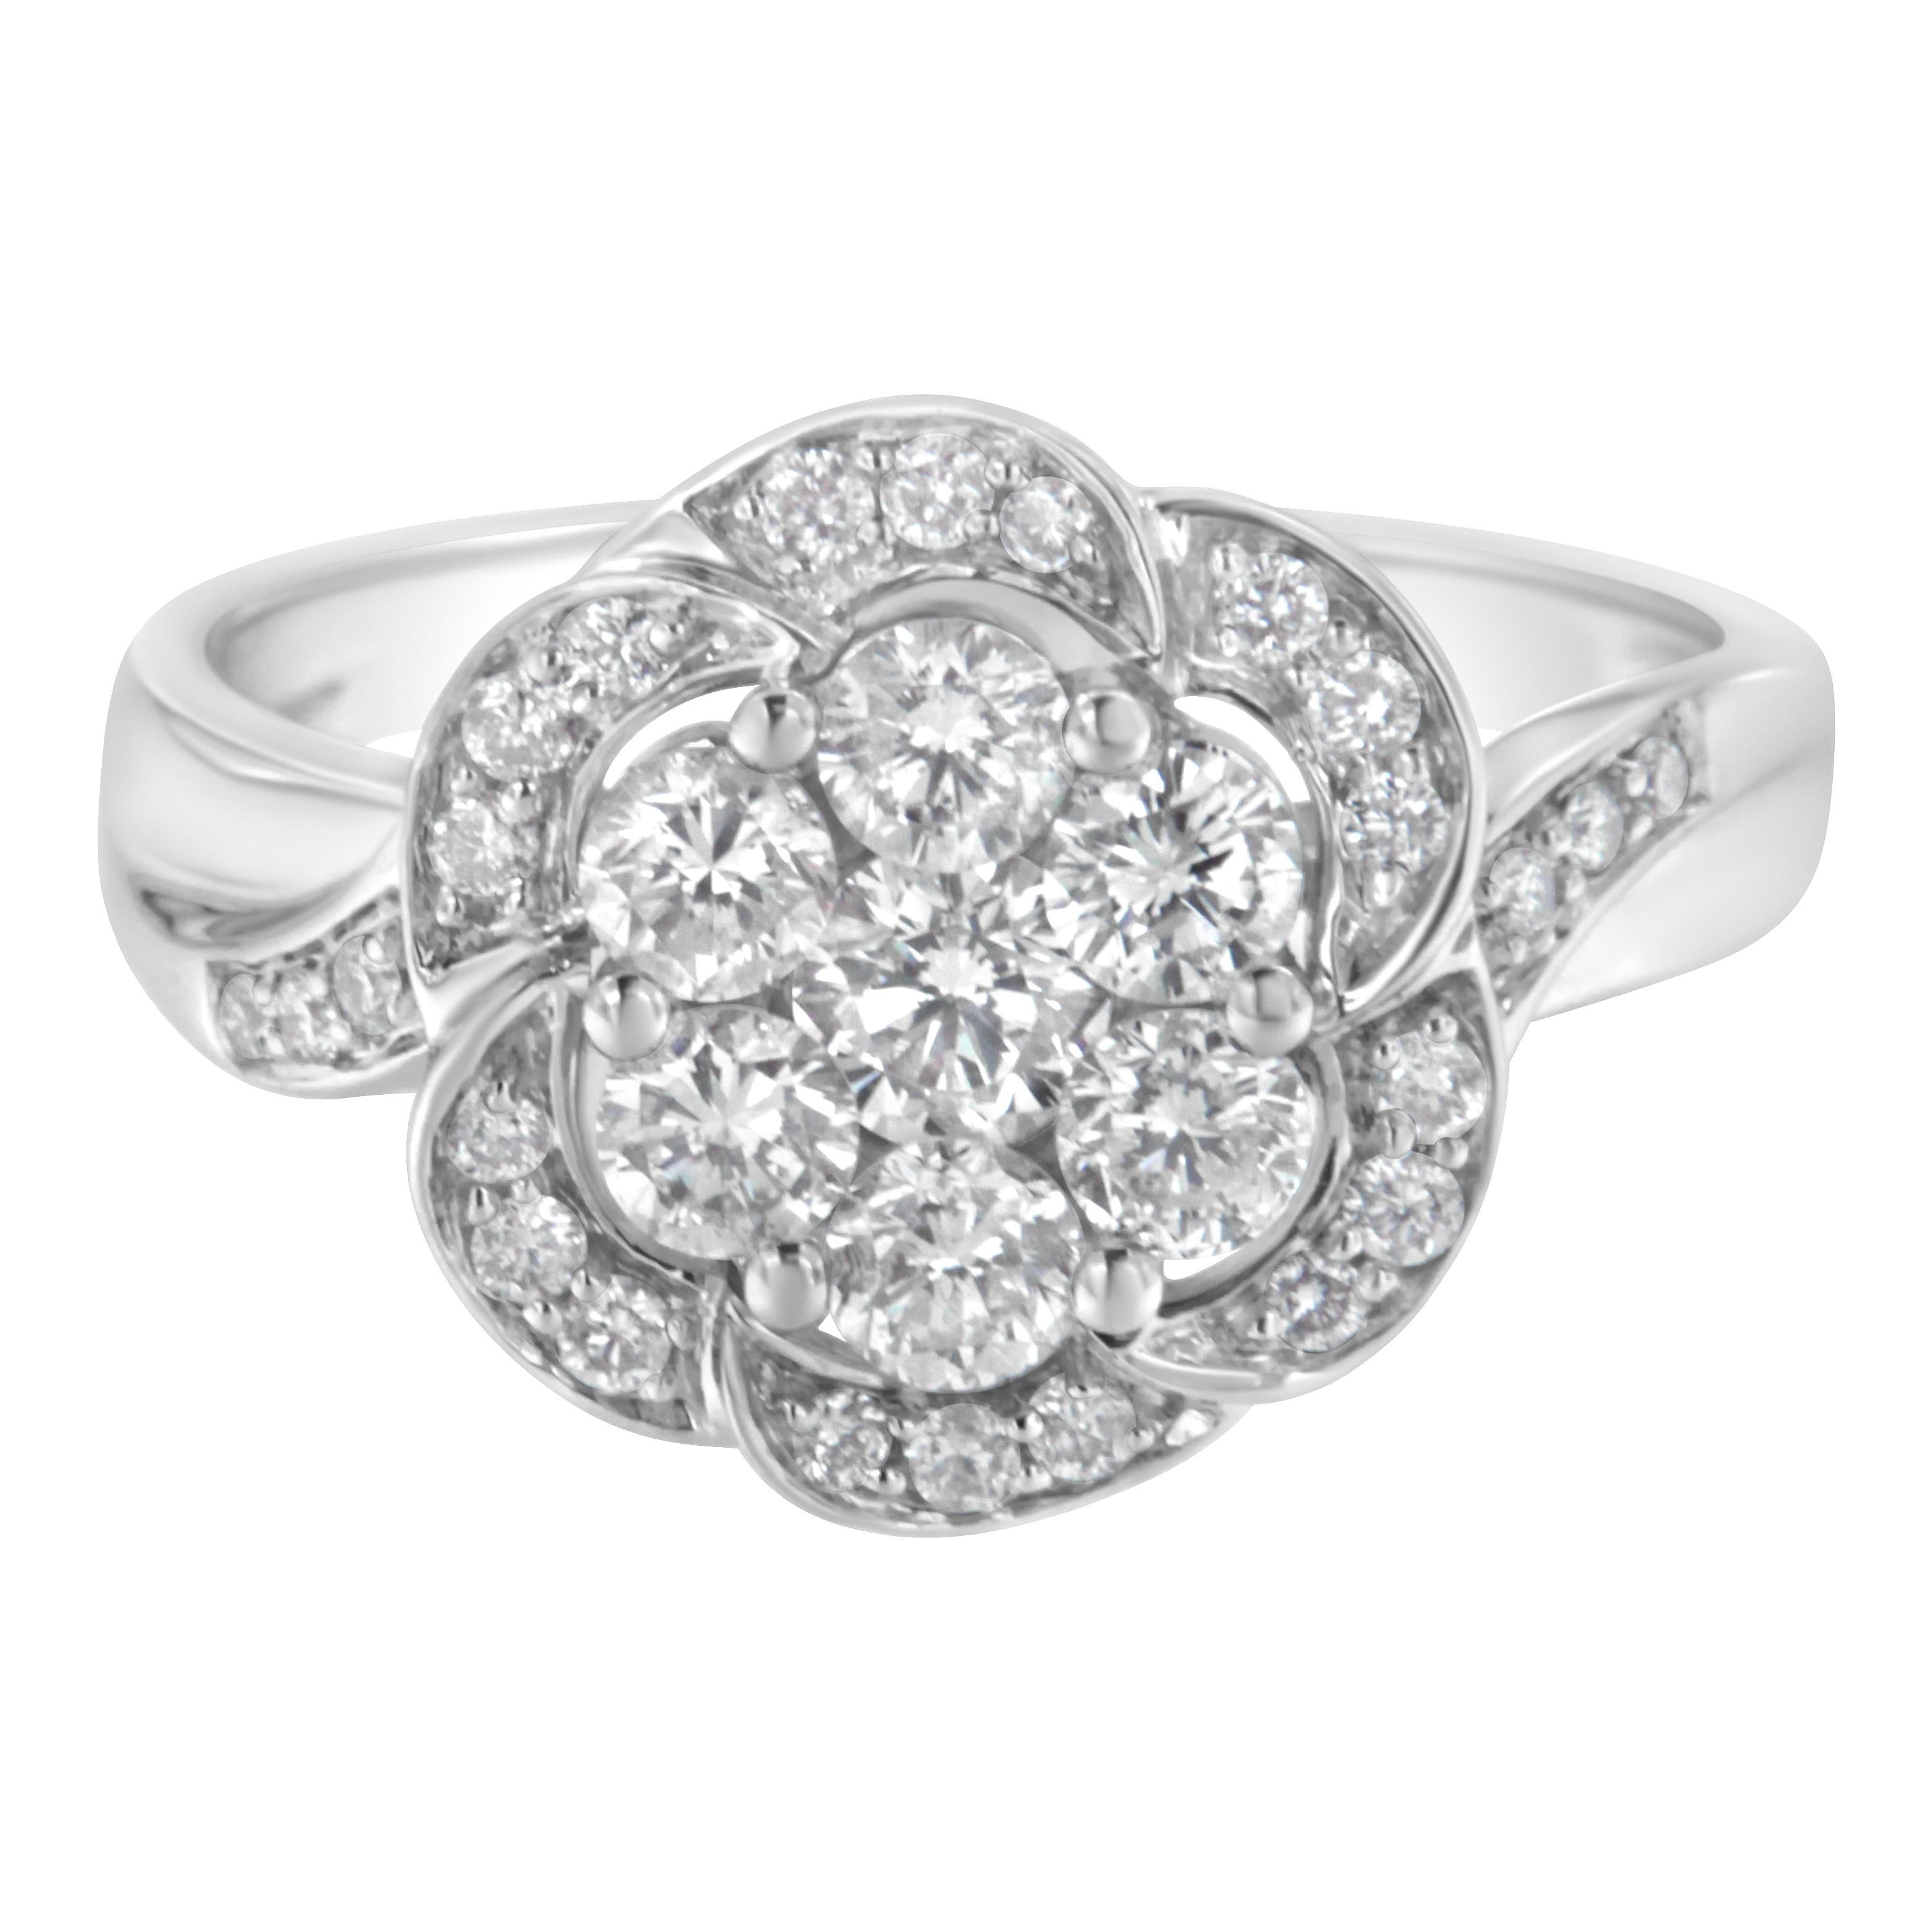 For Sale:  14K White Gold 1.00 Carat Floral Cluster Diamond Ring 3